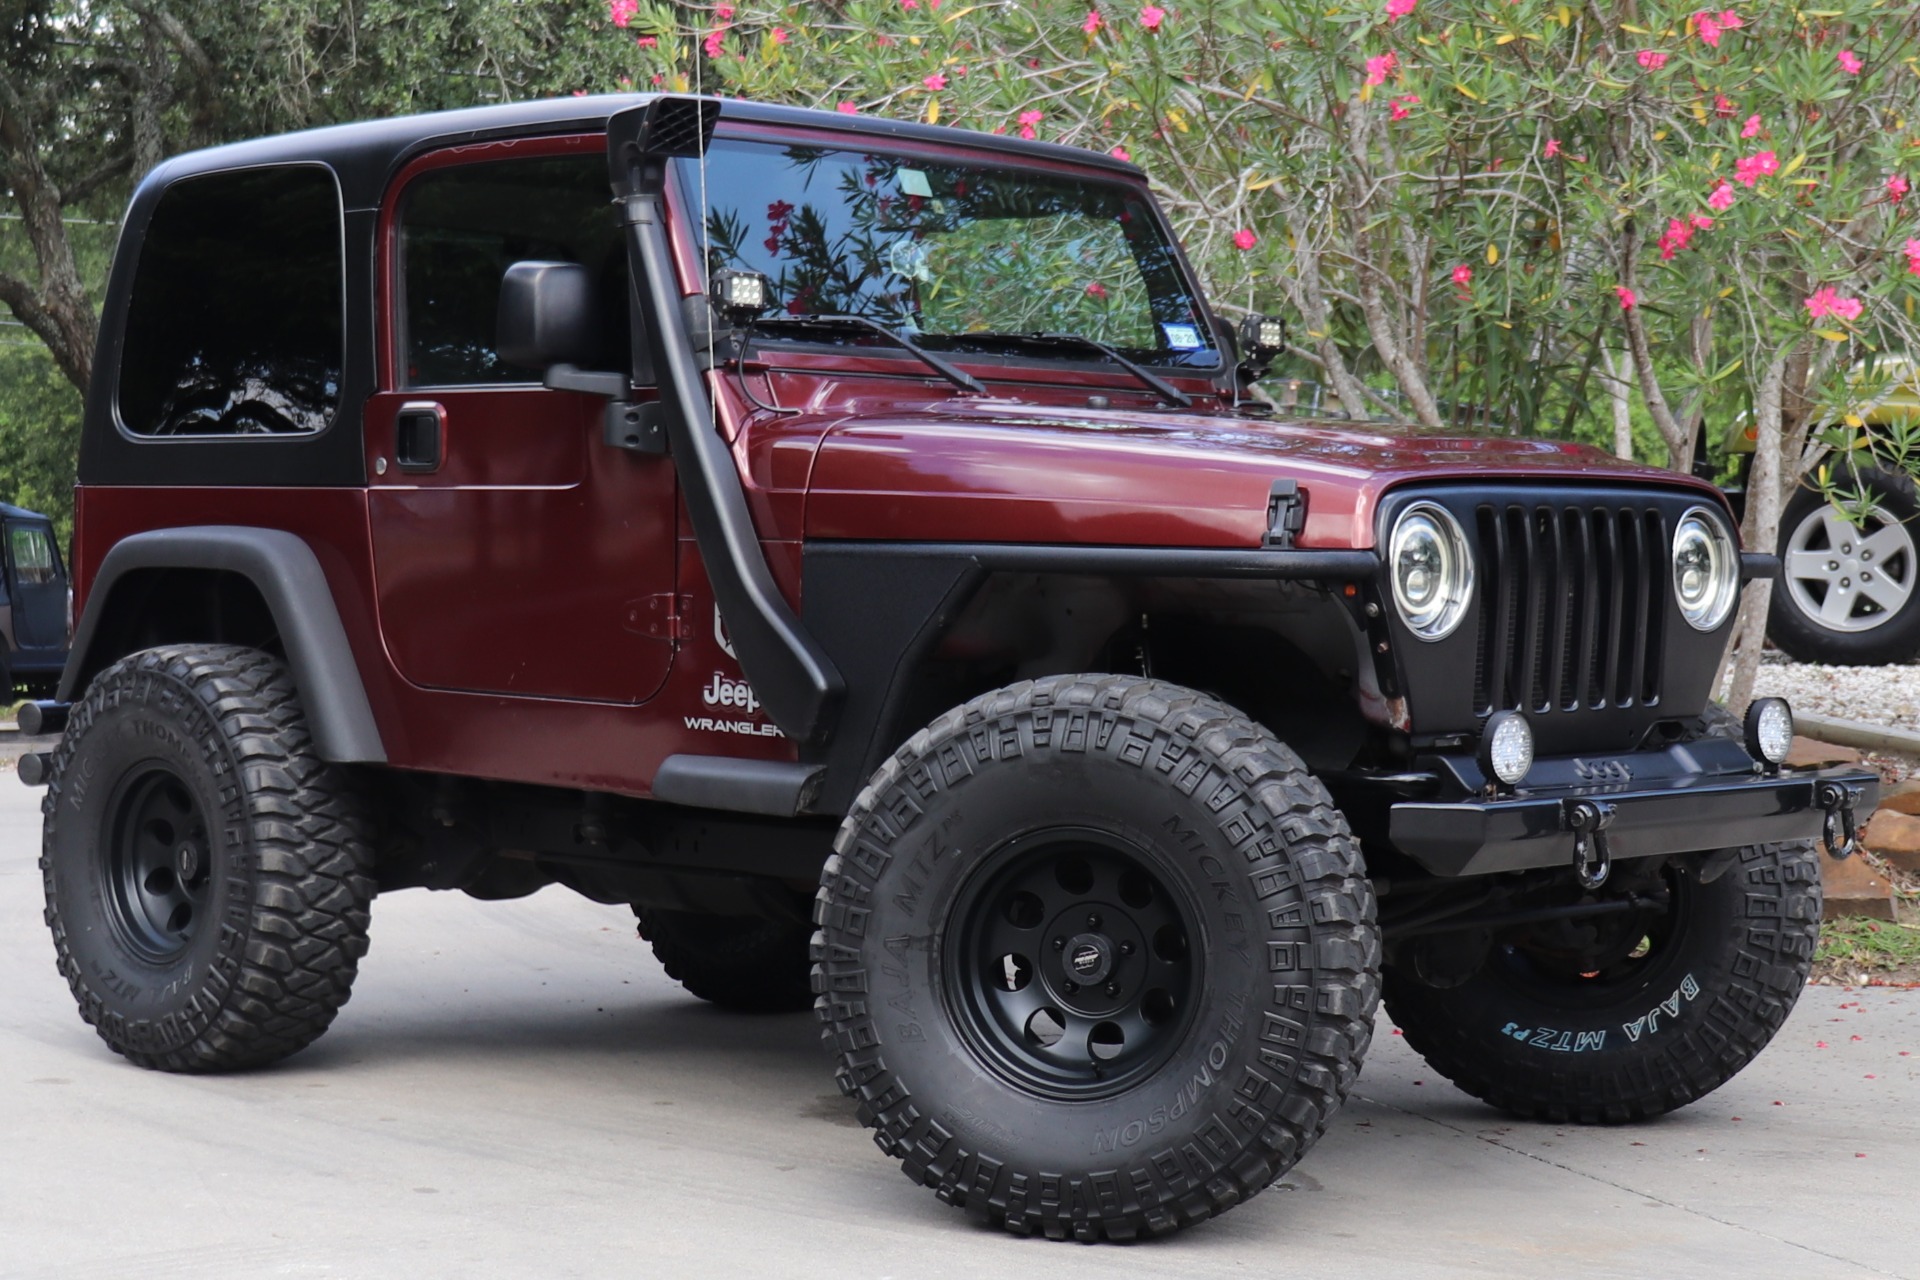 Used 2004 Jeep Wrangler X For Sale ($15,995) | Select Jeeps Inc. Stock  #703934